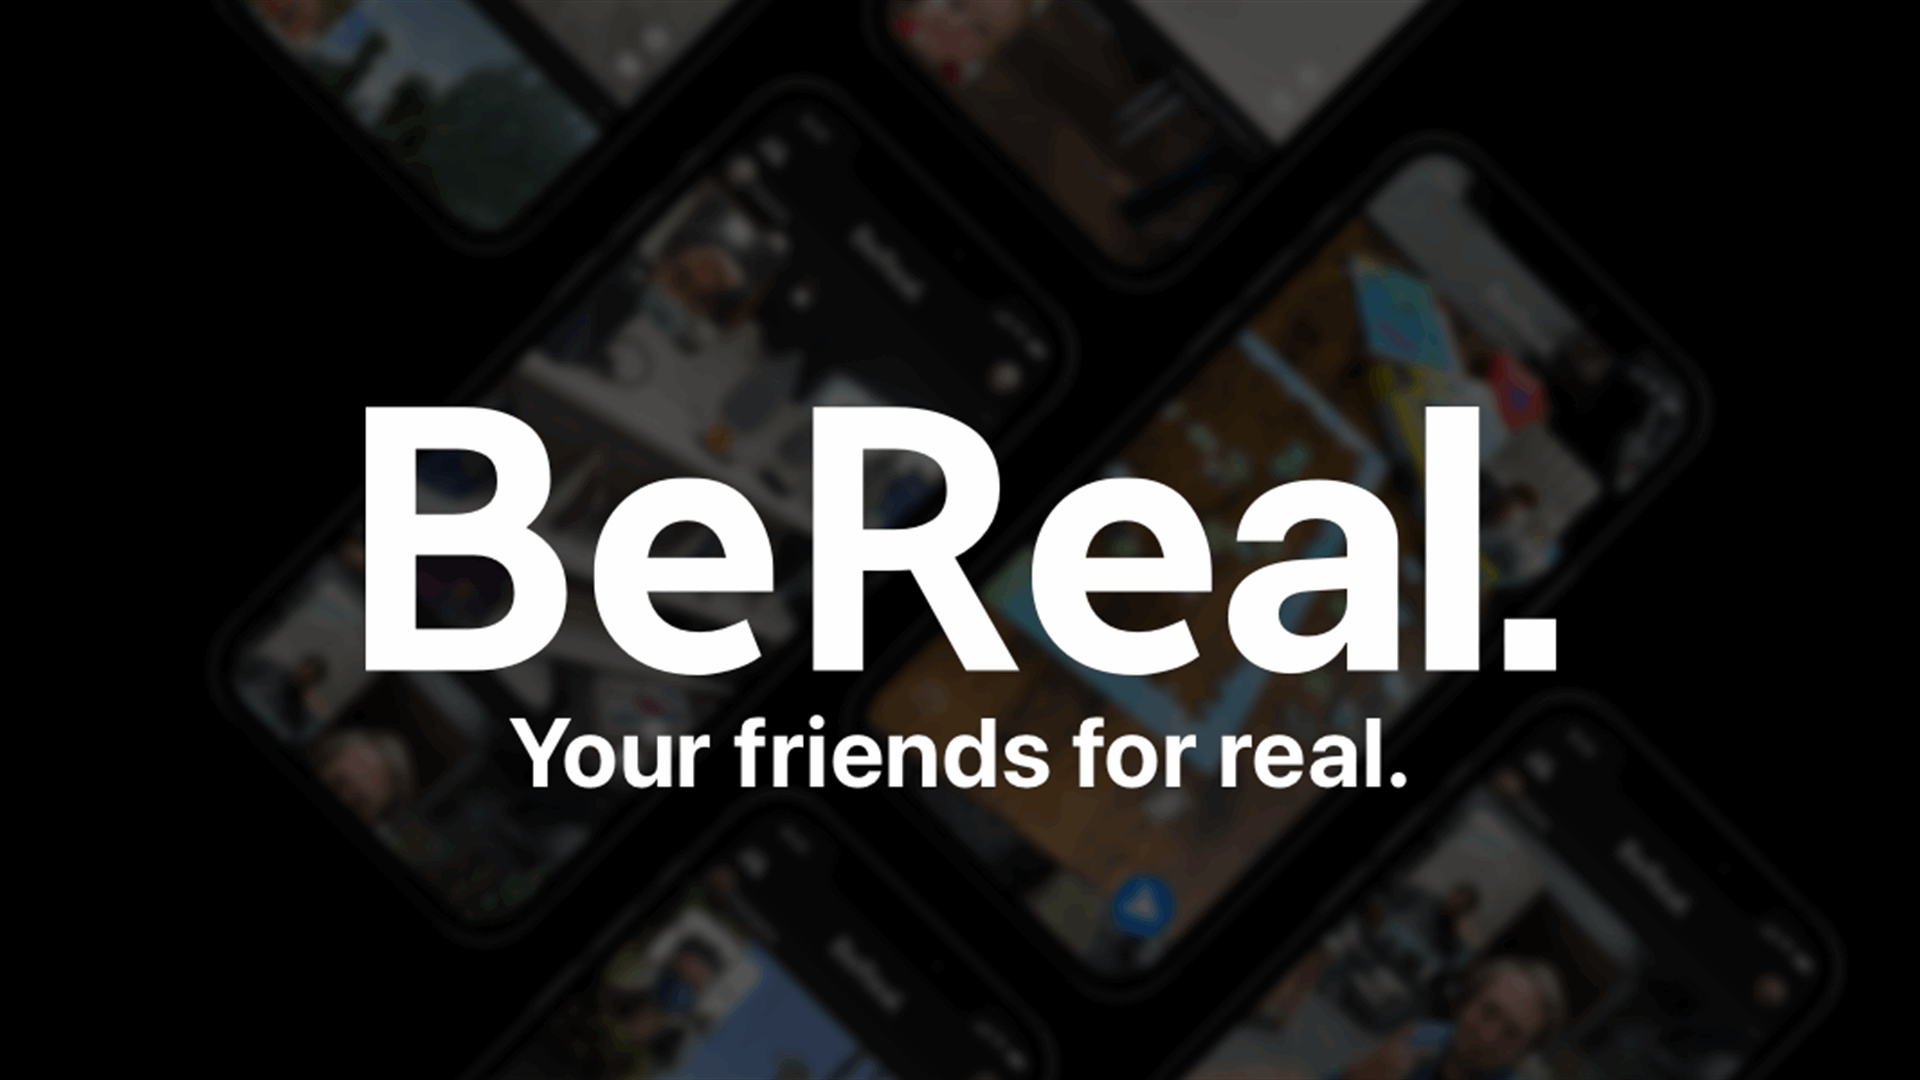 BeReal pushes back at report that it’s losing steam, says it now has 25M daily users